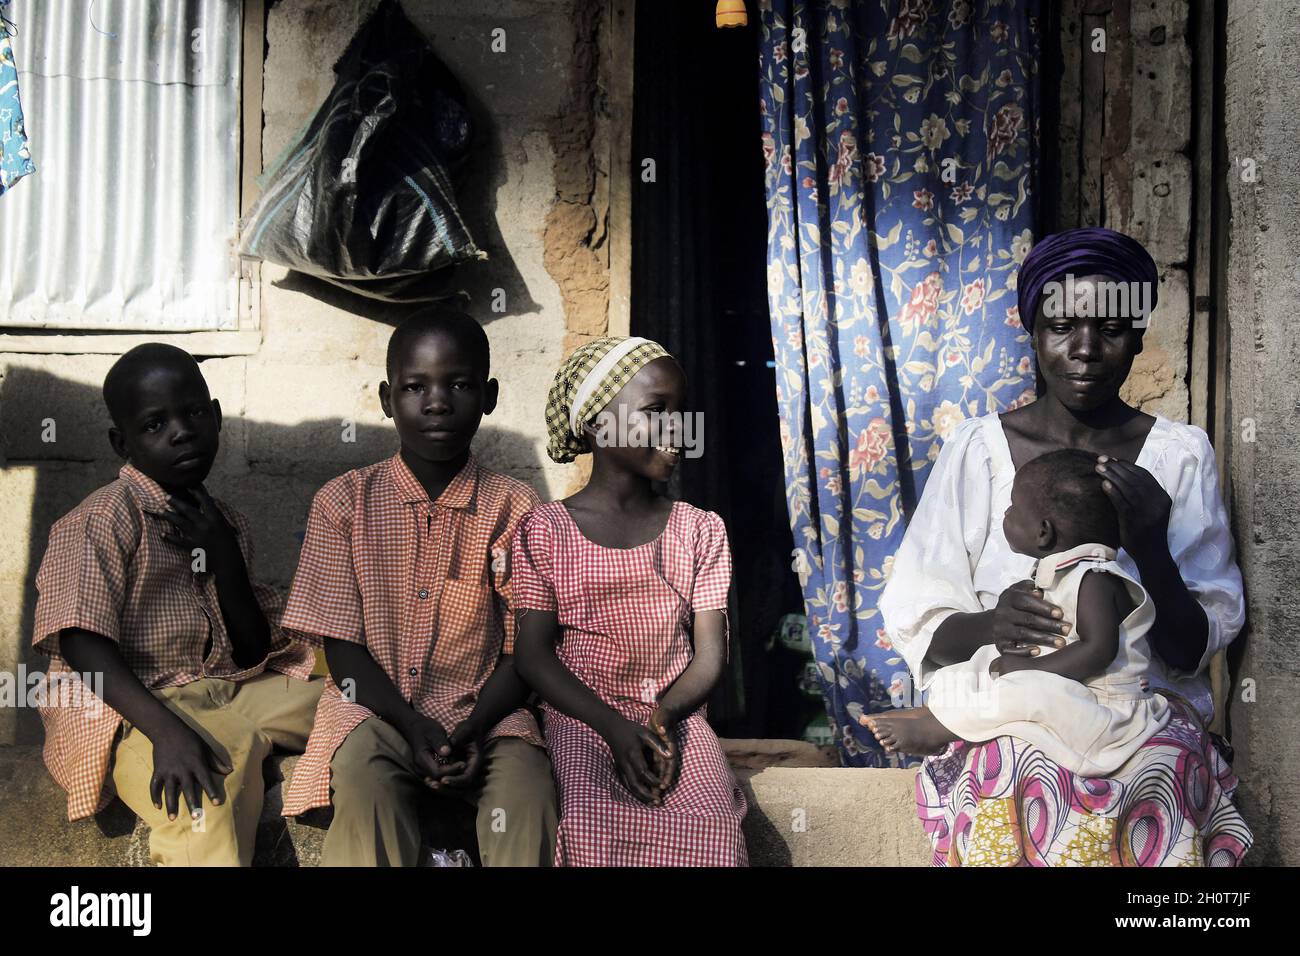 Members of Boko Haram chased Martha Garba out of Gulak, Madagali, in Adamawa State, after an attack in which Martha’s husband was murdered. Contrary to Martha’s story, her neighbours claim that members of Boko Haram captured and threatened her to deceptively convince her husband to descend a mountain, which served as her family’s fortress. Allegedly deceived by his wife, whom was under Boko Haram’s threat, Martha’s husband thought his village was freed of Boko Haram, and so returned to his death, at his house. Martha eventually escaped with her five children to Yola, the state capital of Adama Stock Photo